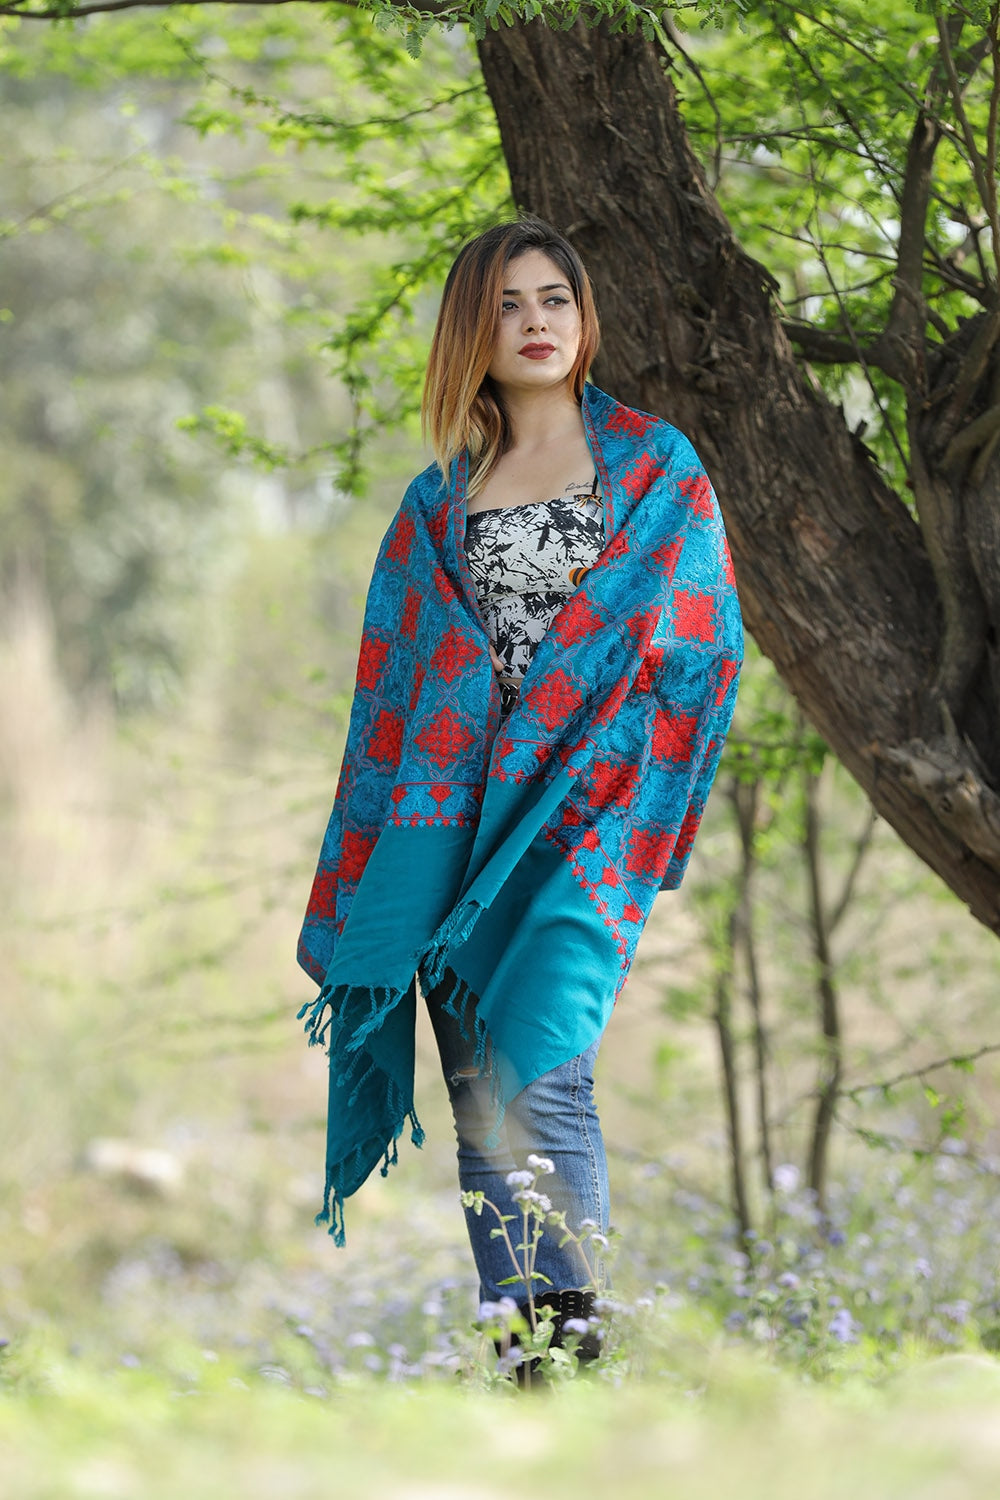 Amazing Turquoise Blue/Green Colour Stole With Graceful